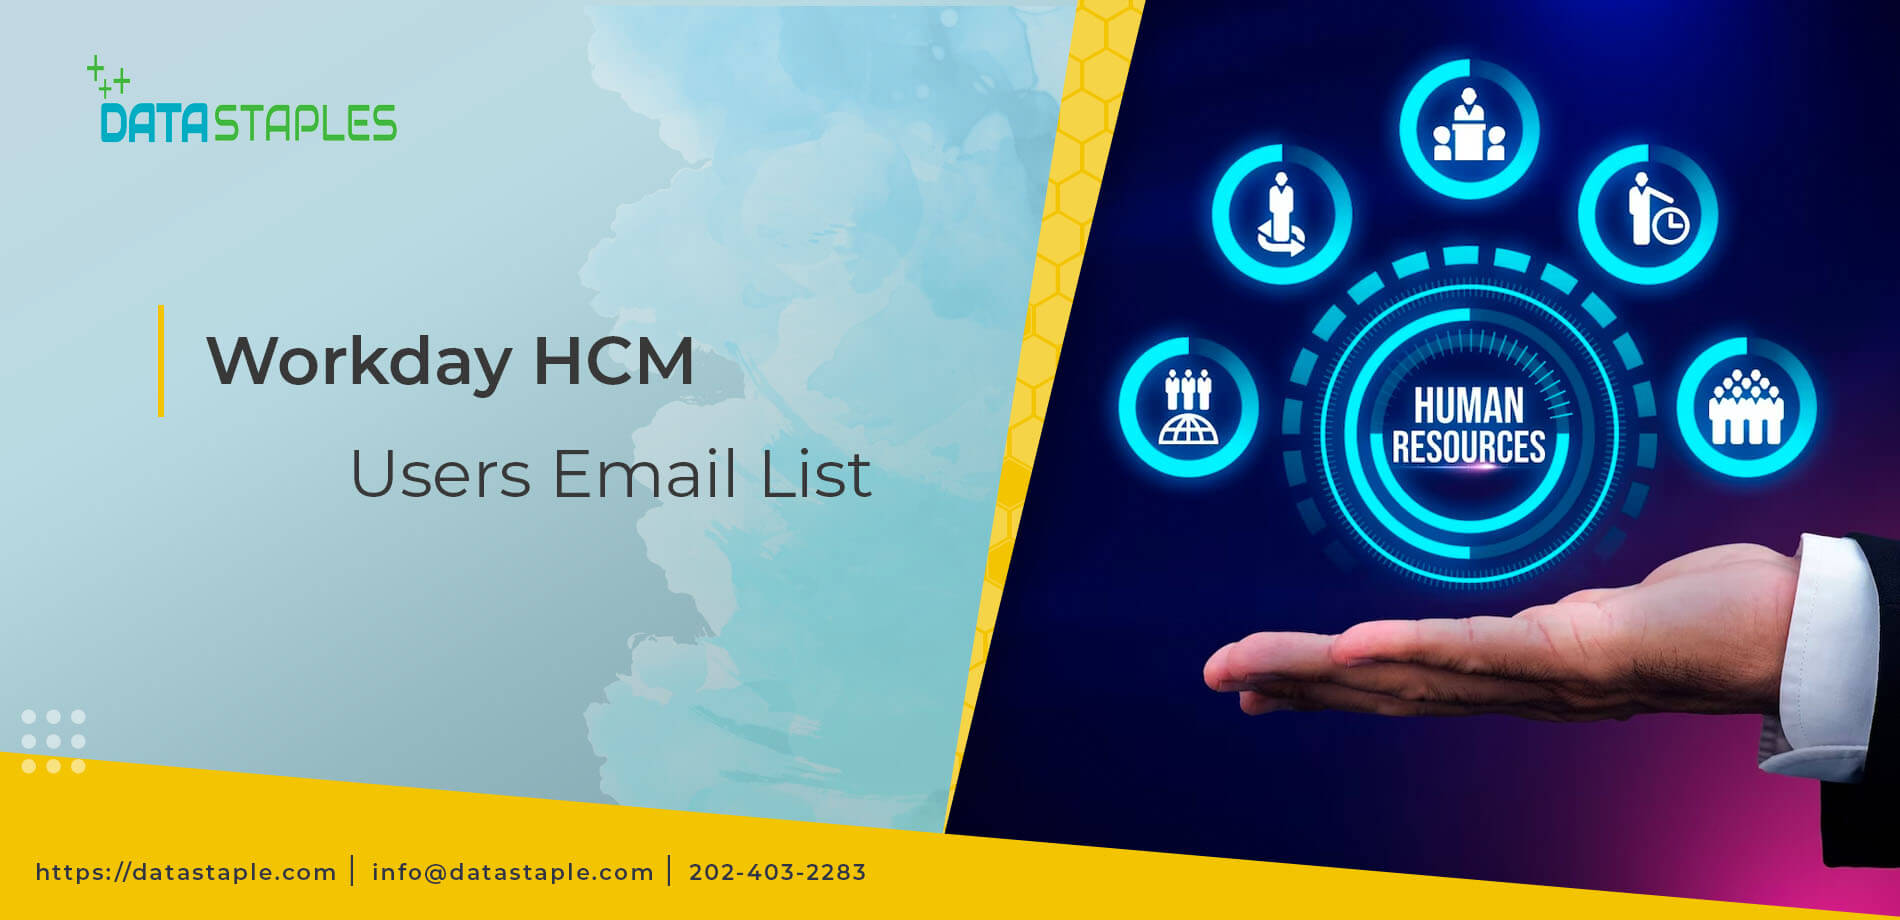 Workday HCM Users Mailing List | DataStaples